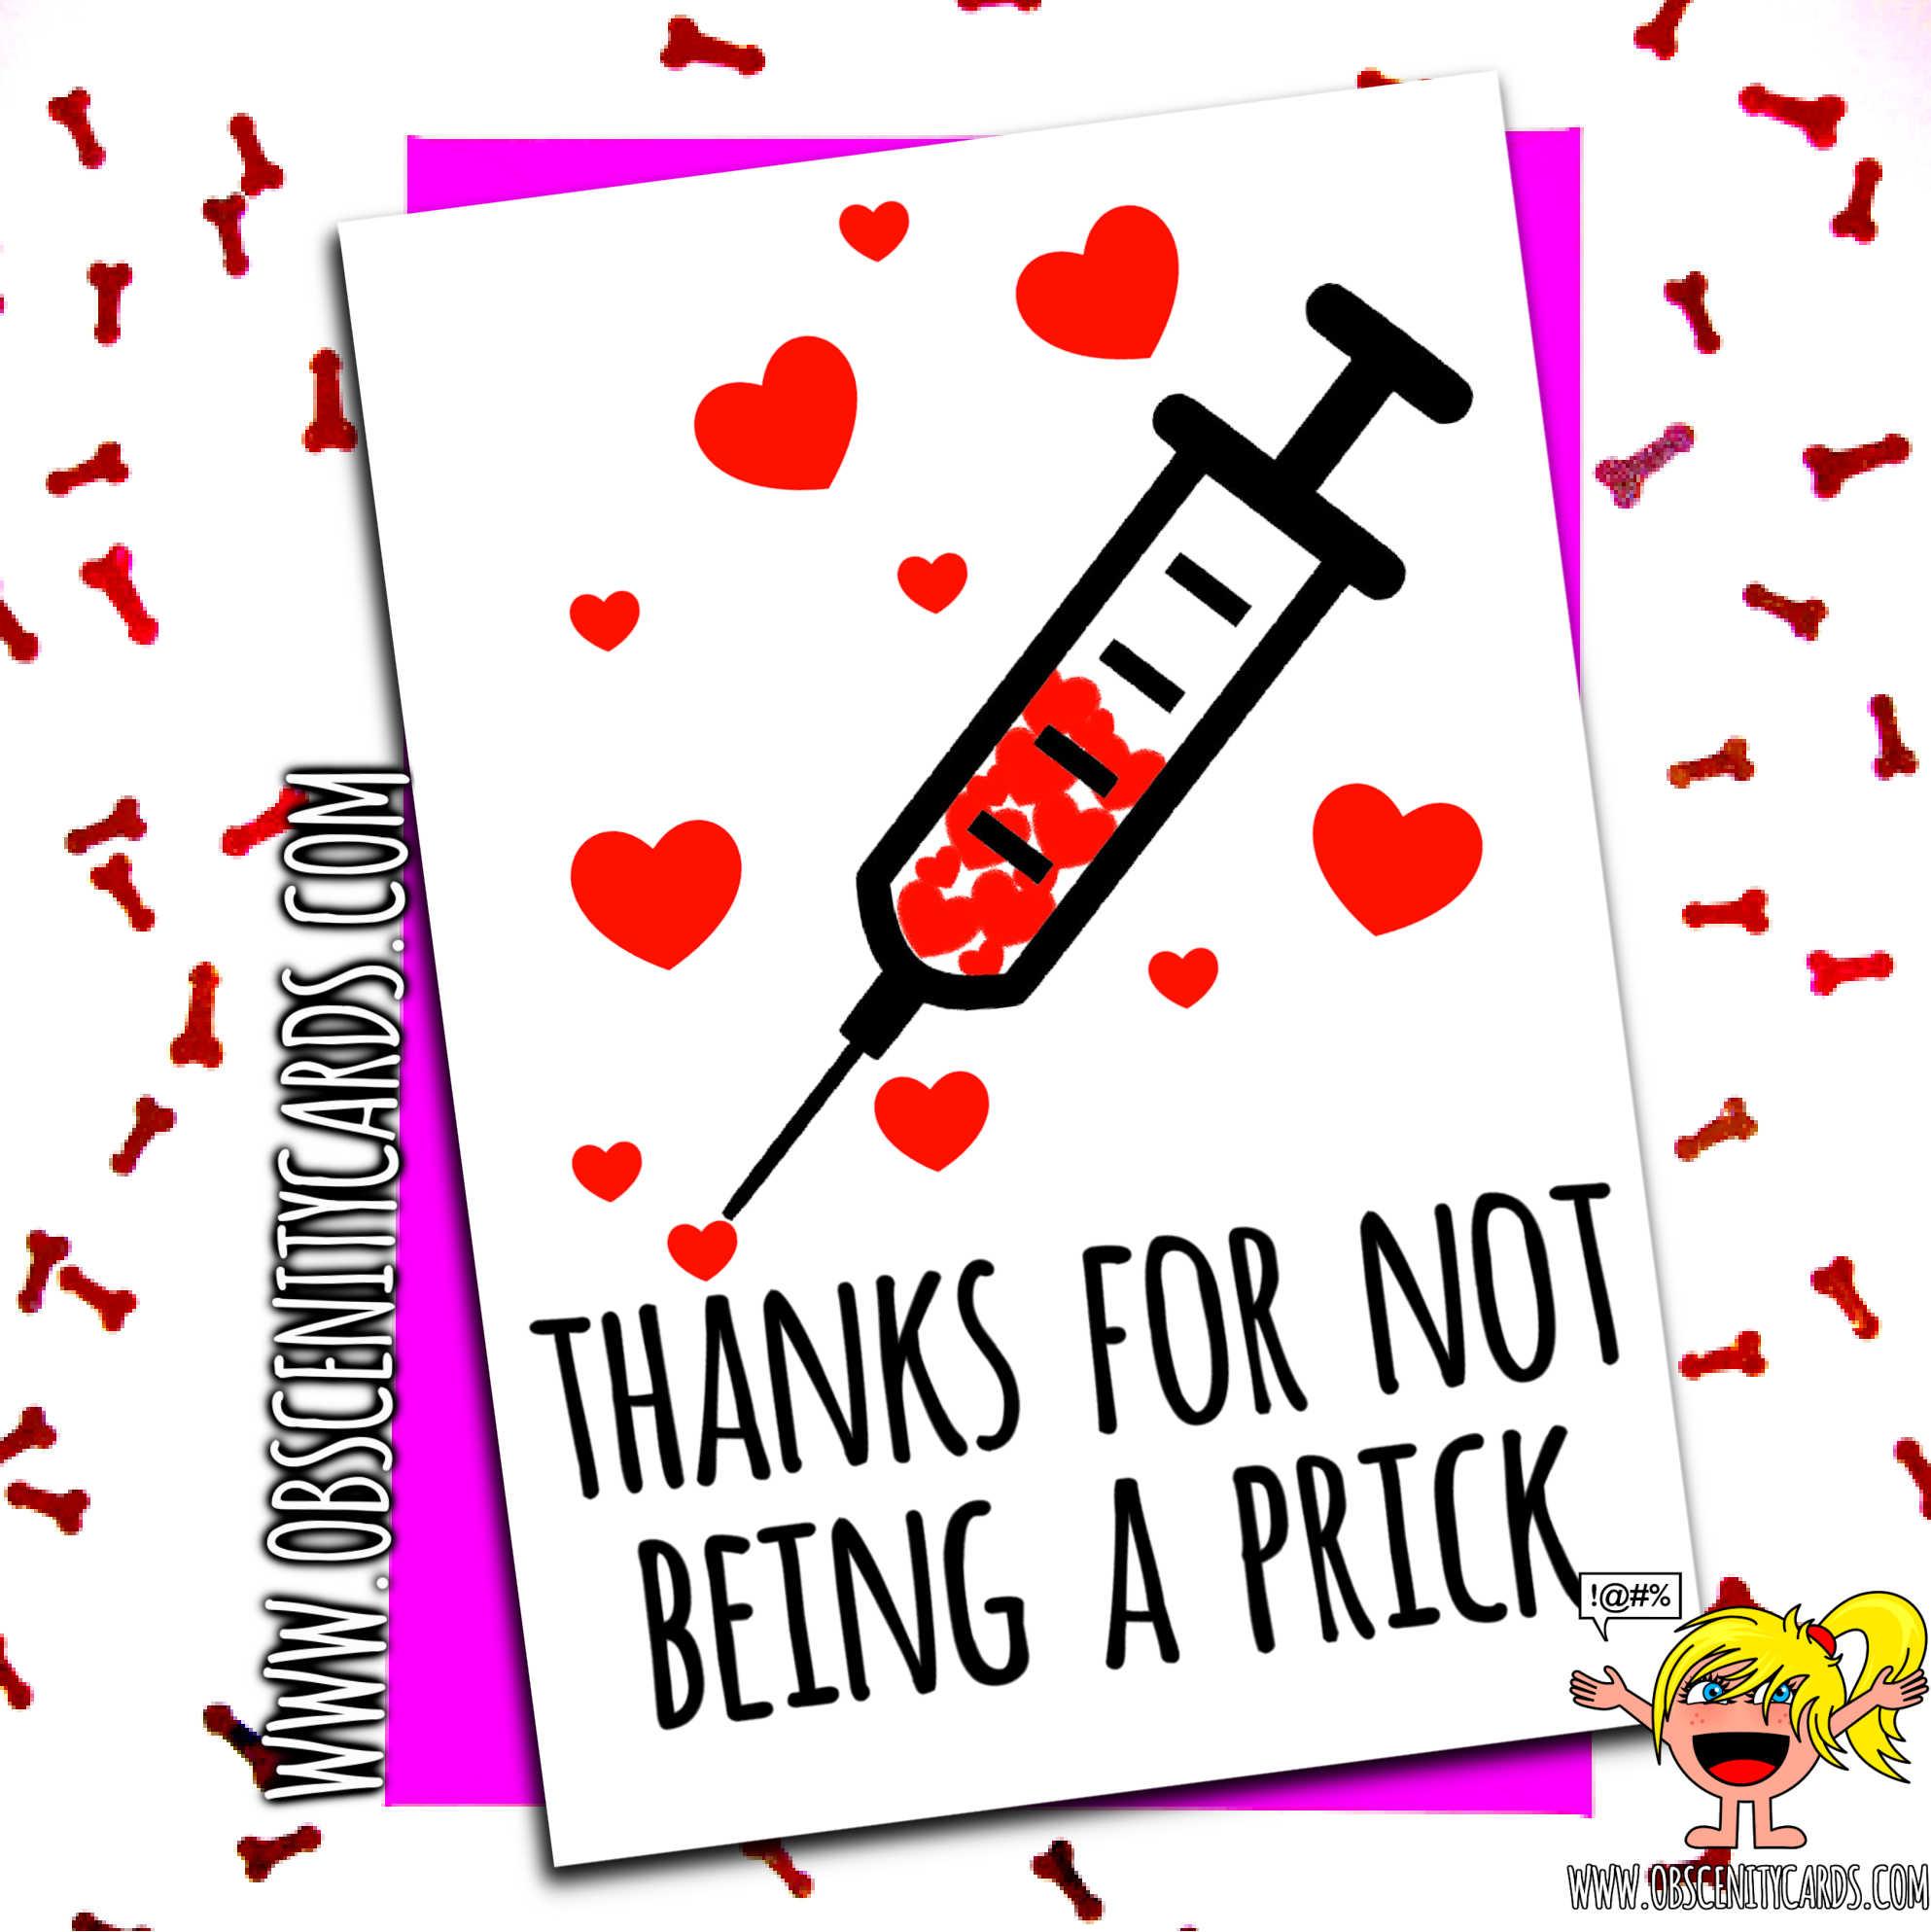 THANKS FOR NOT BEING A PRICK VALENTINE'S ANNIVERSARY CARD